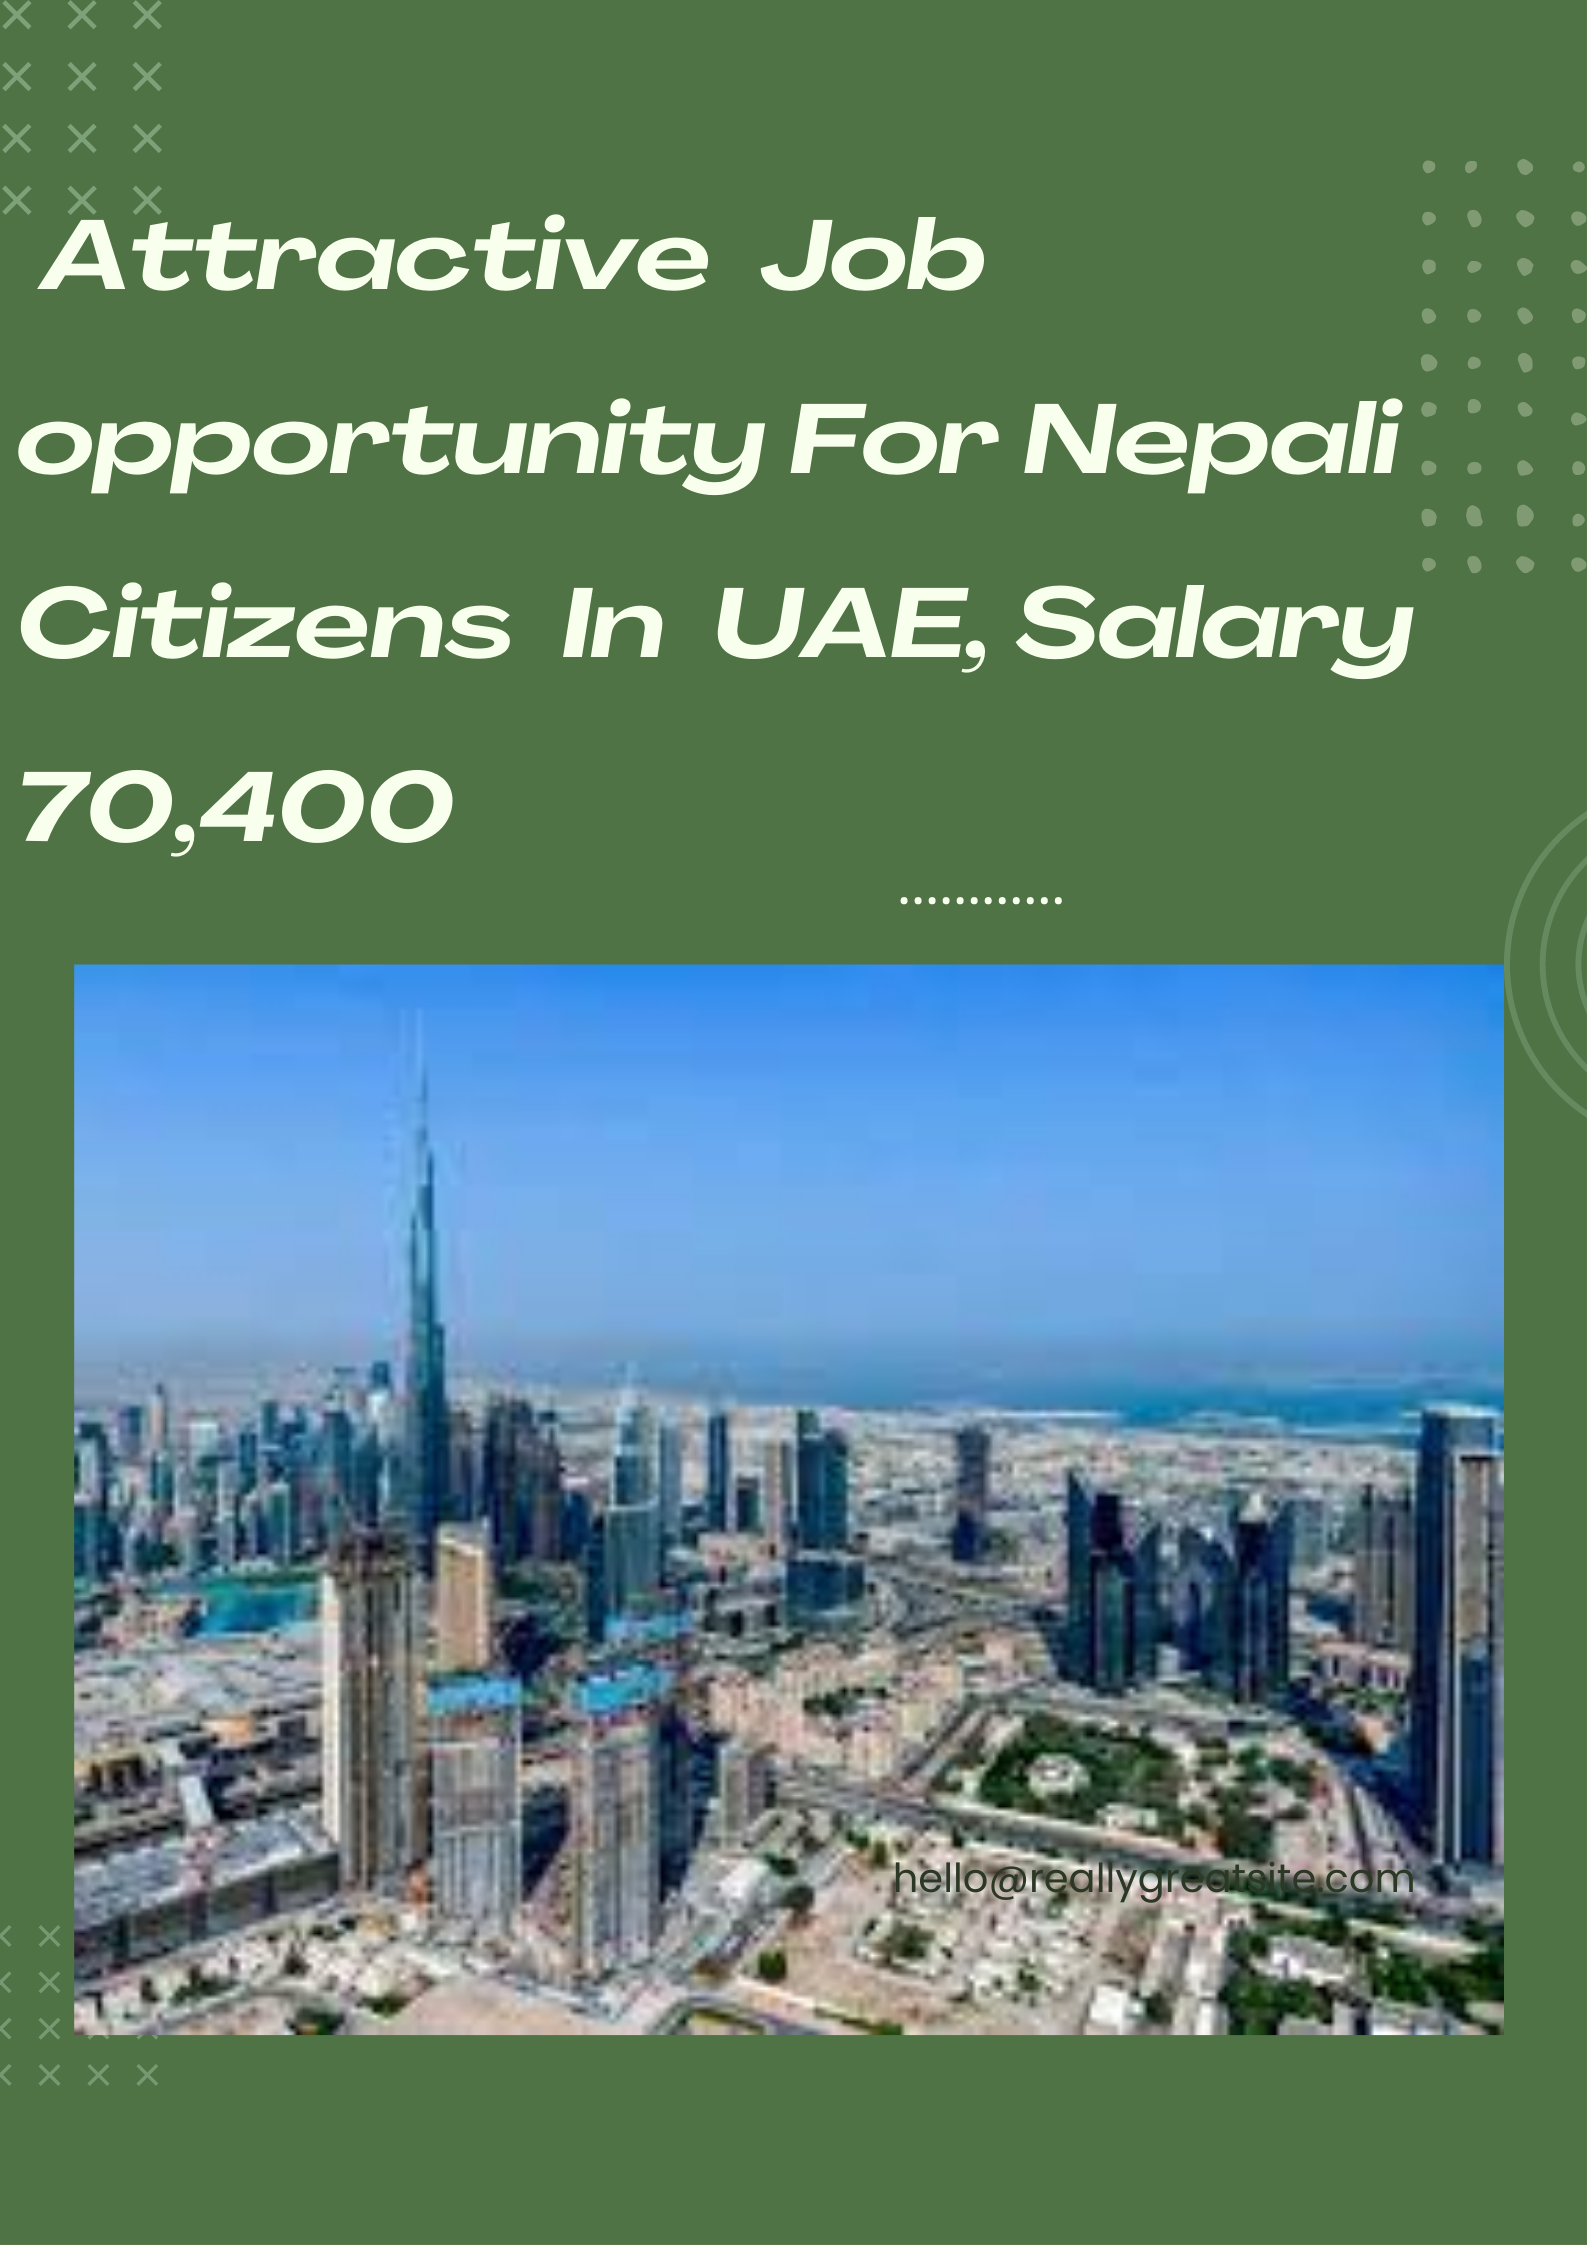 Attractive Job Opportunity in Foreign For Nepali Citizens, Salary 70,400